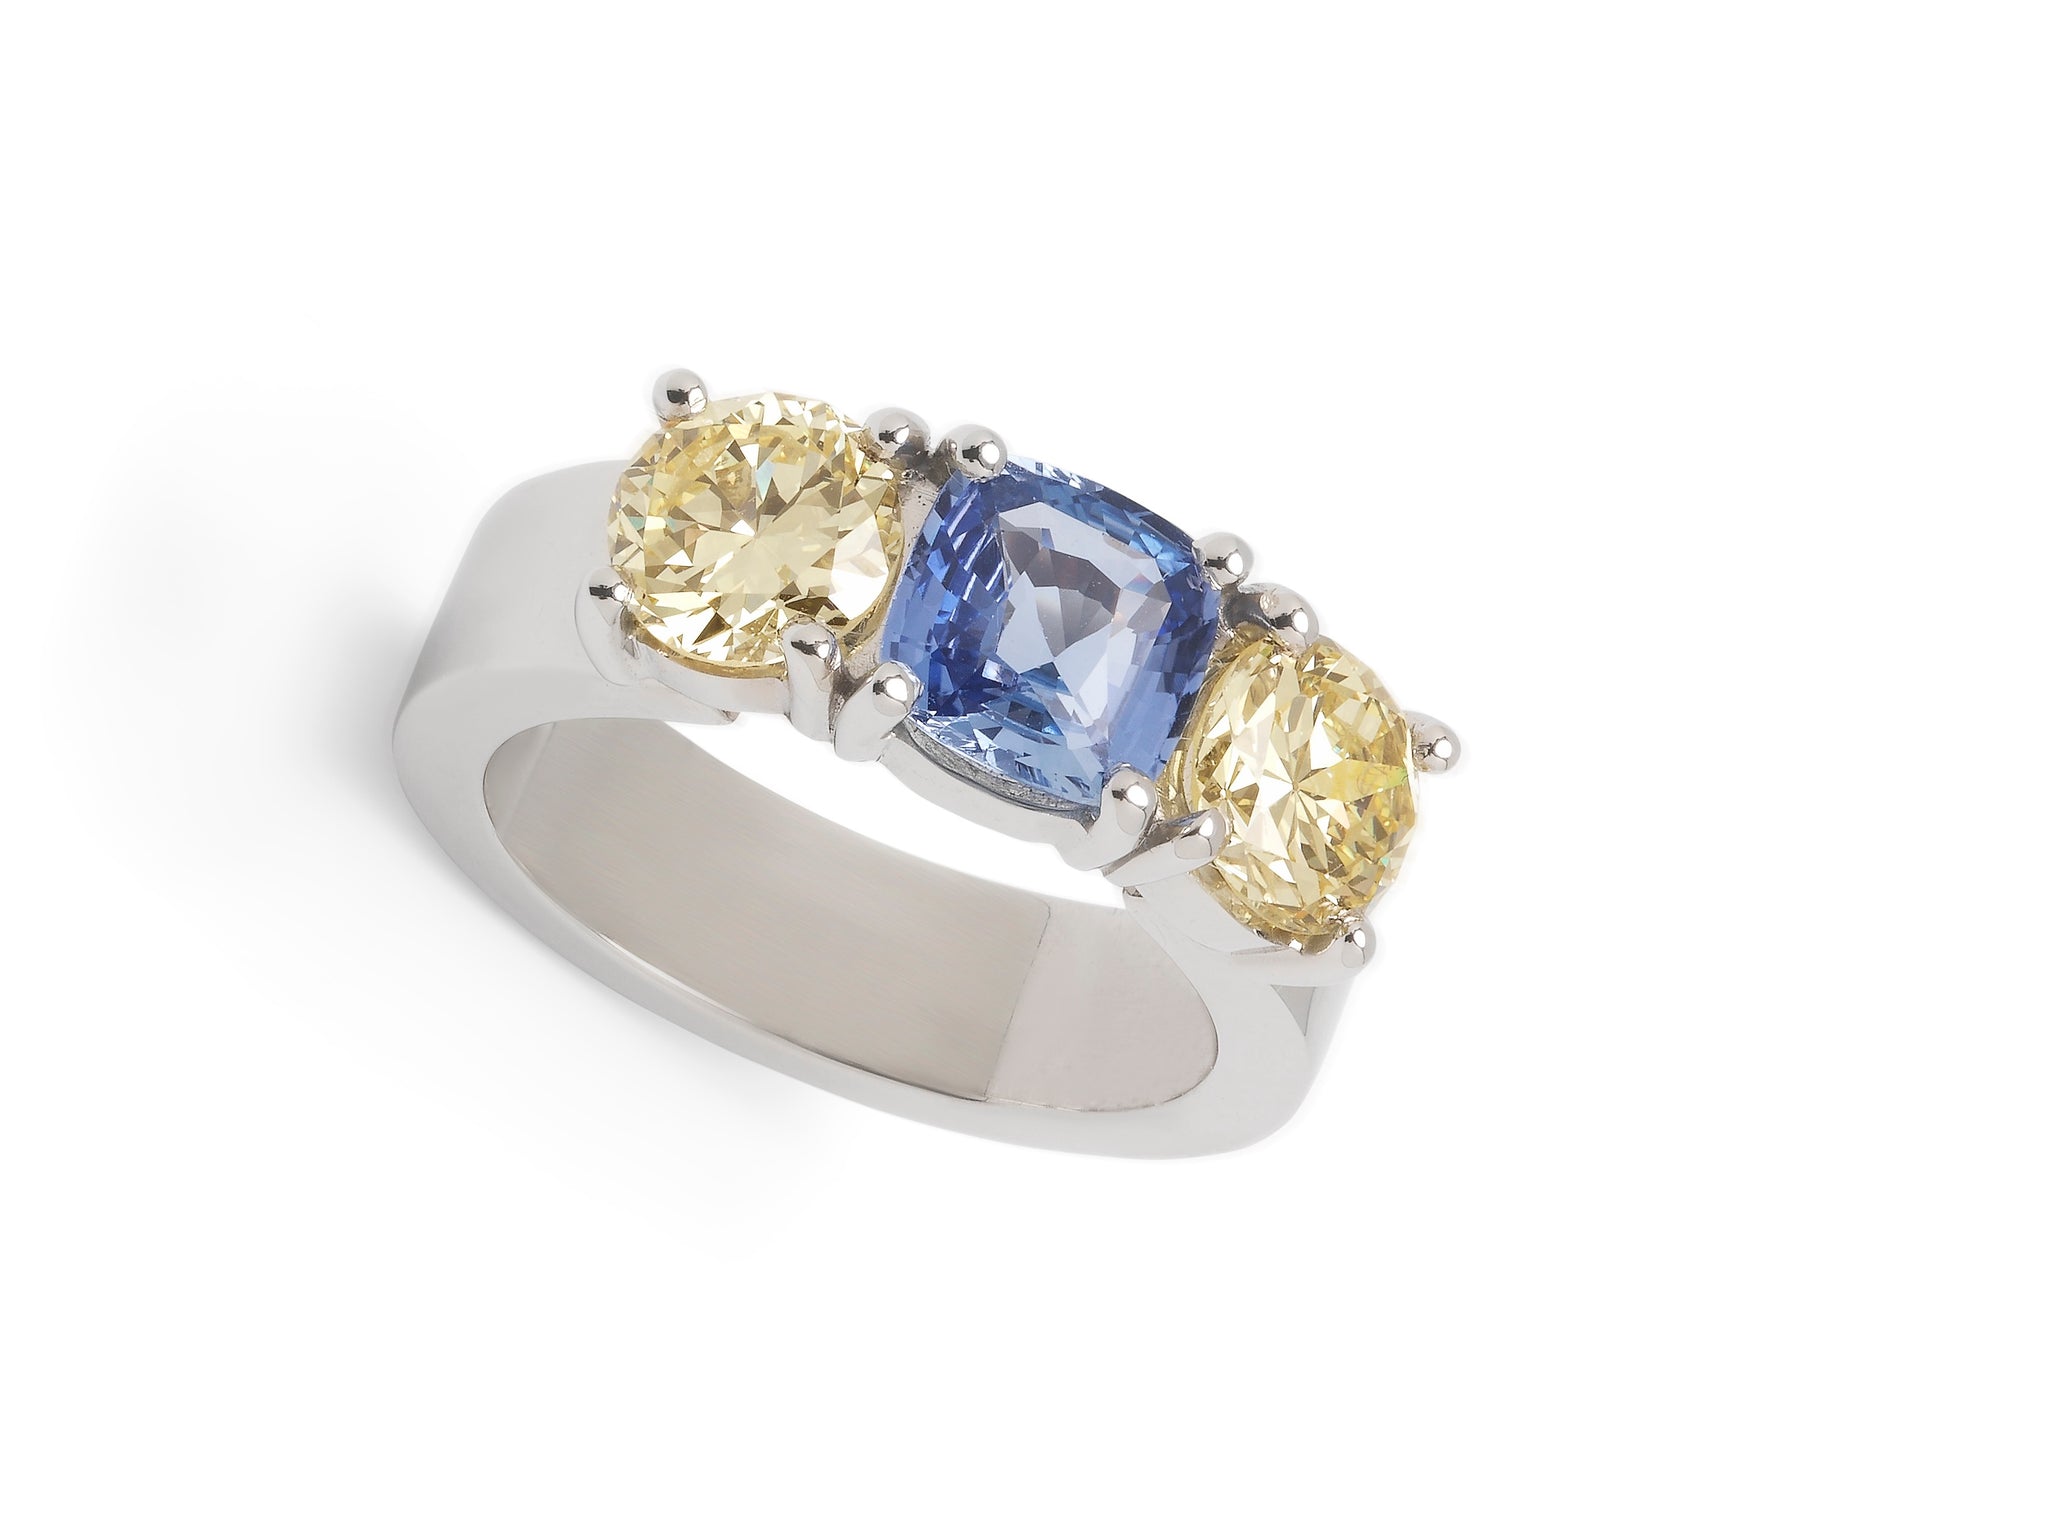 18 krt white gold ring set with cushion blue Sapphire and two brilliant cut diamonds